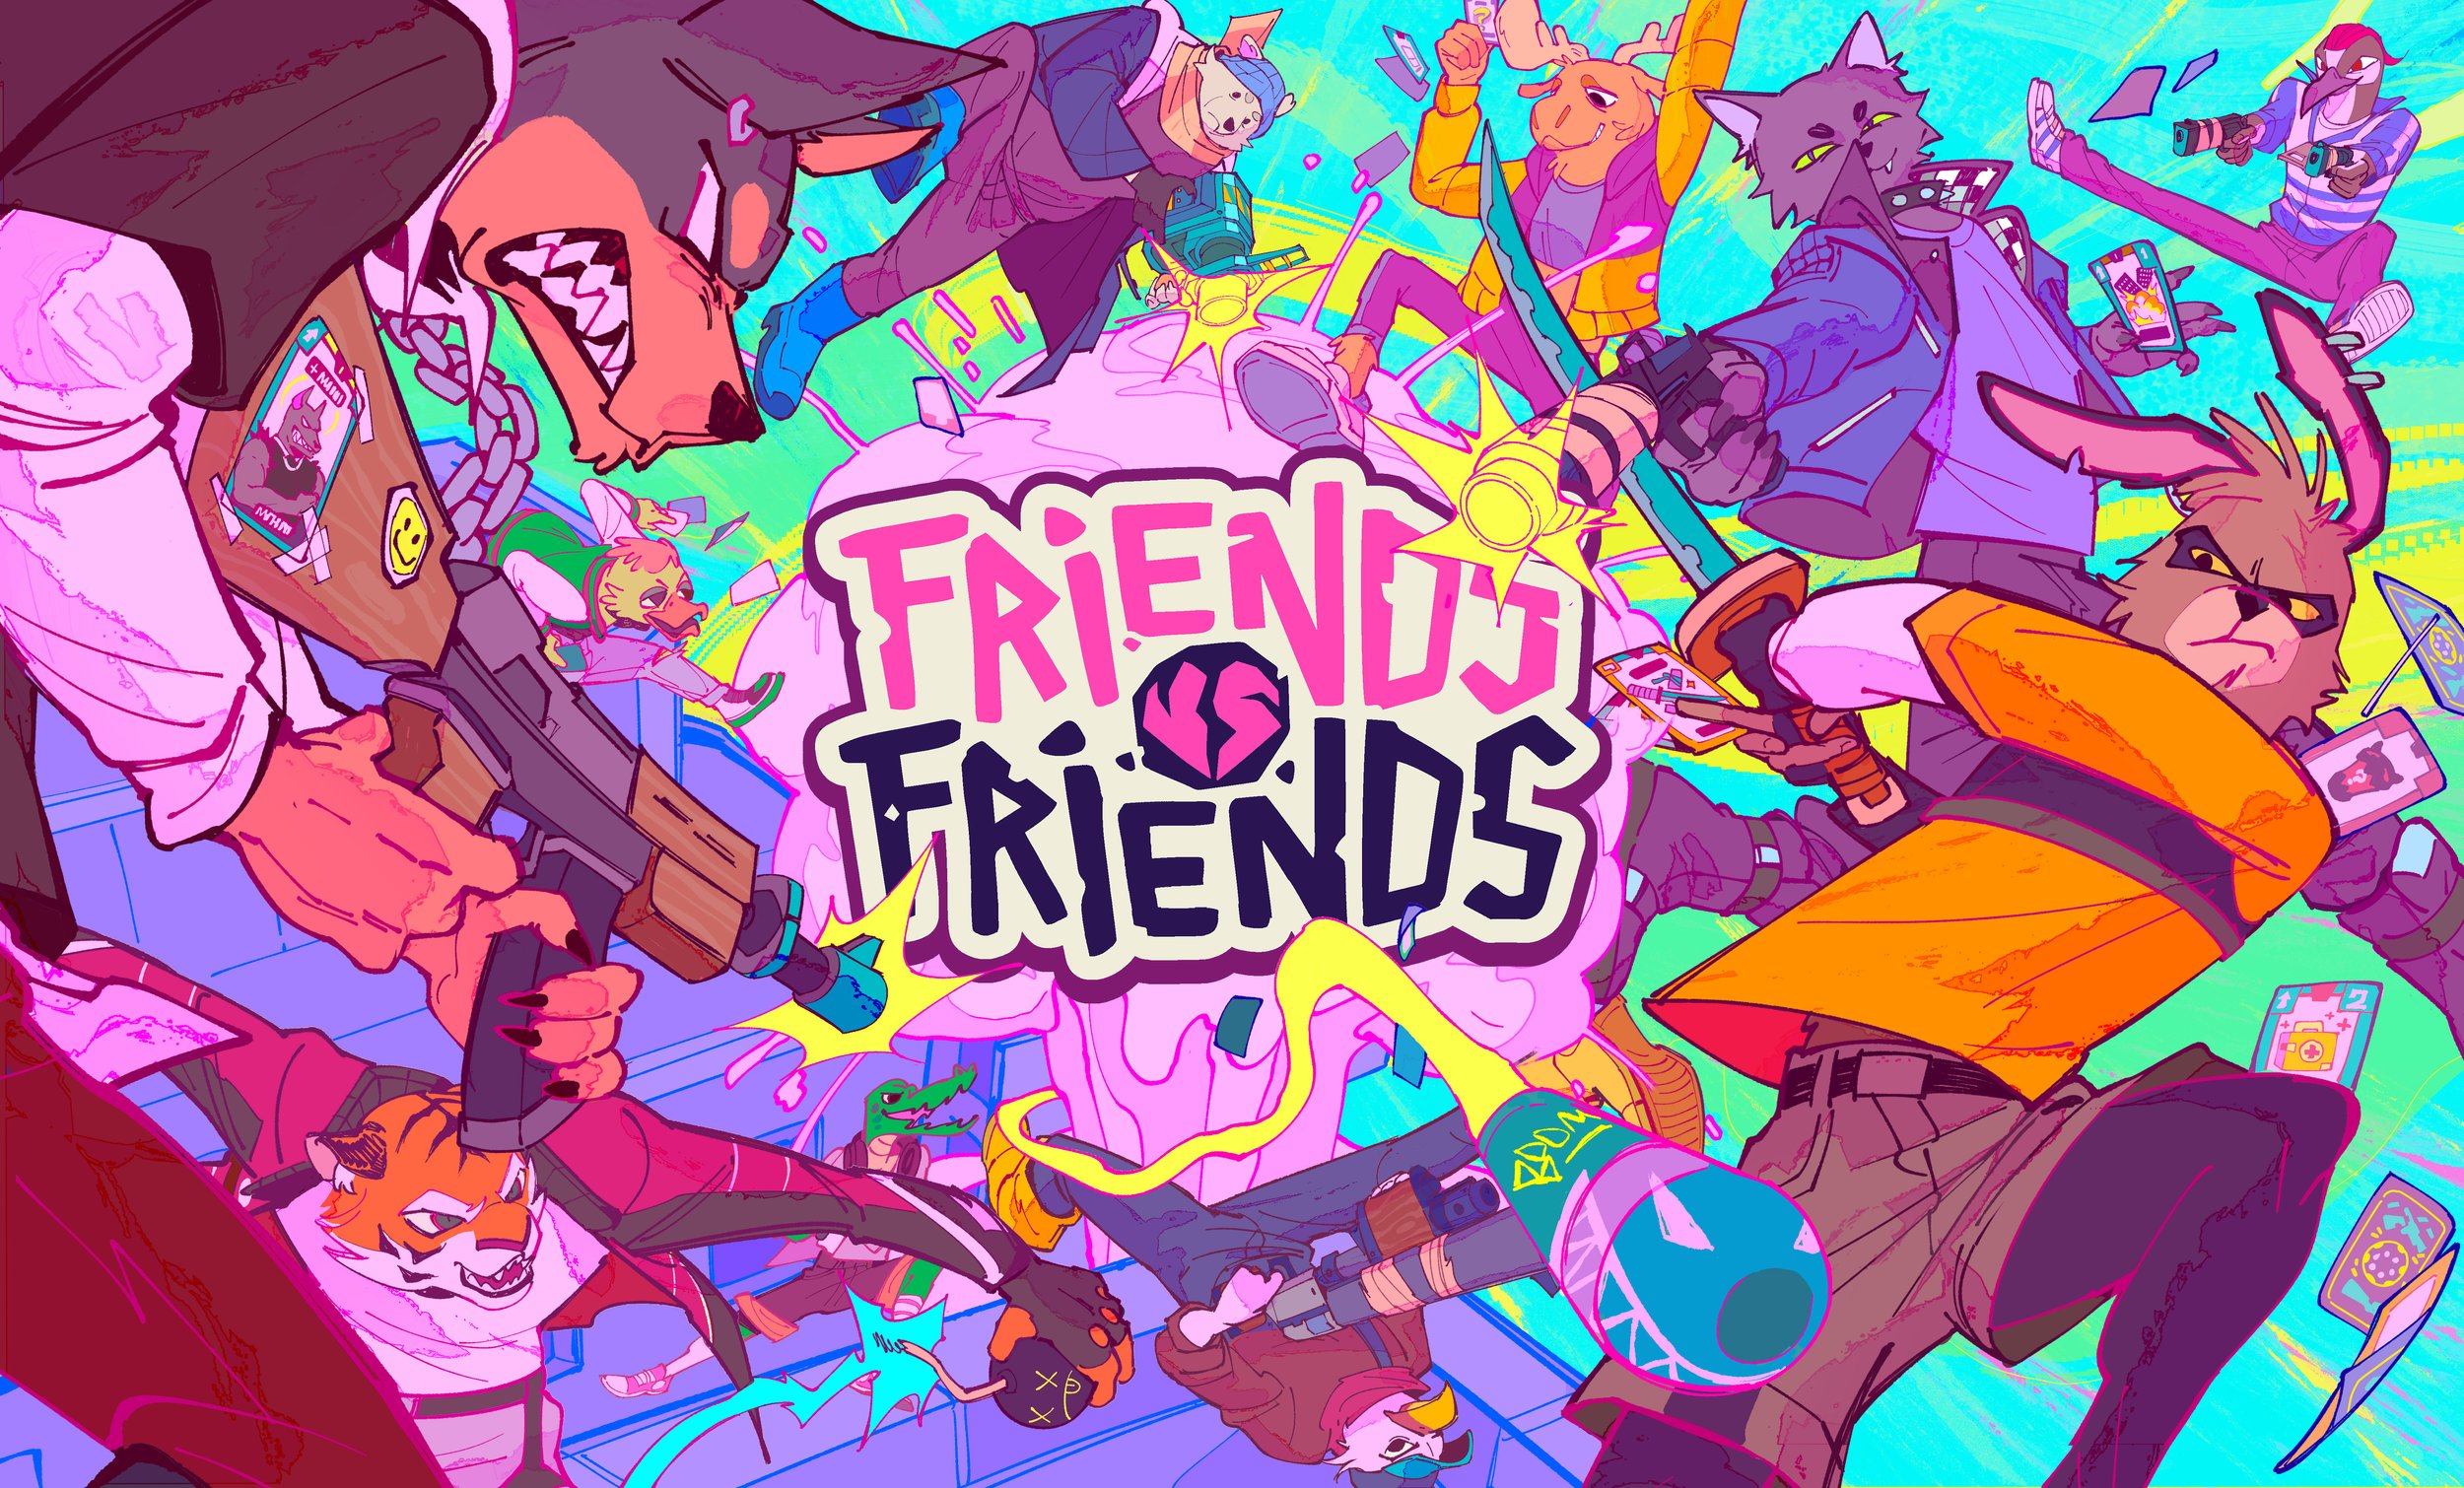  Splash art for the Friends vs Friends created by Raw Fury. 